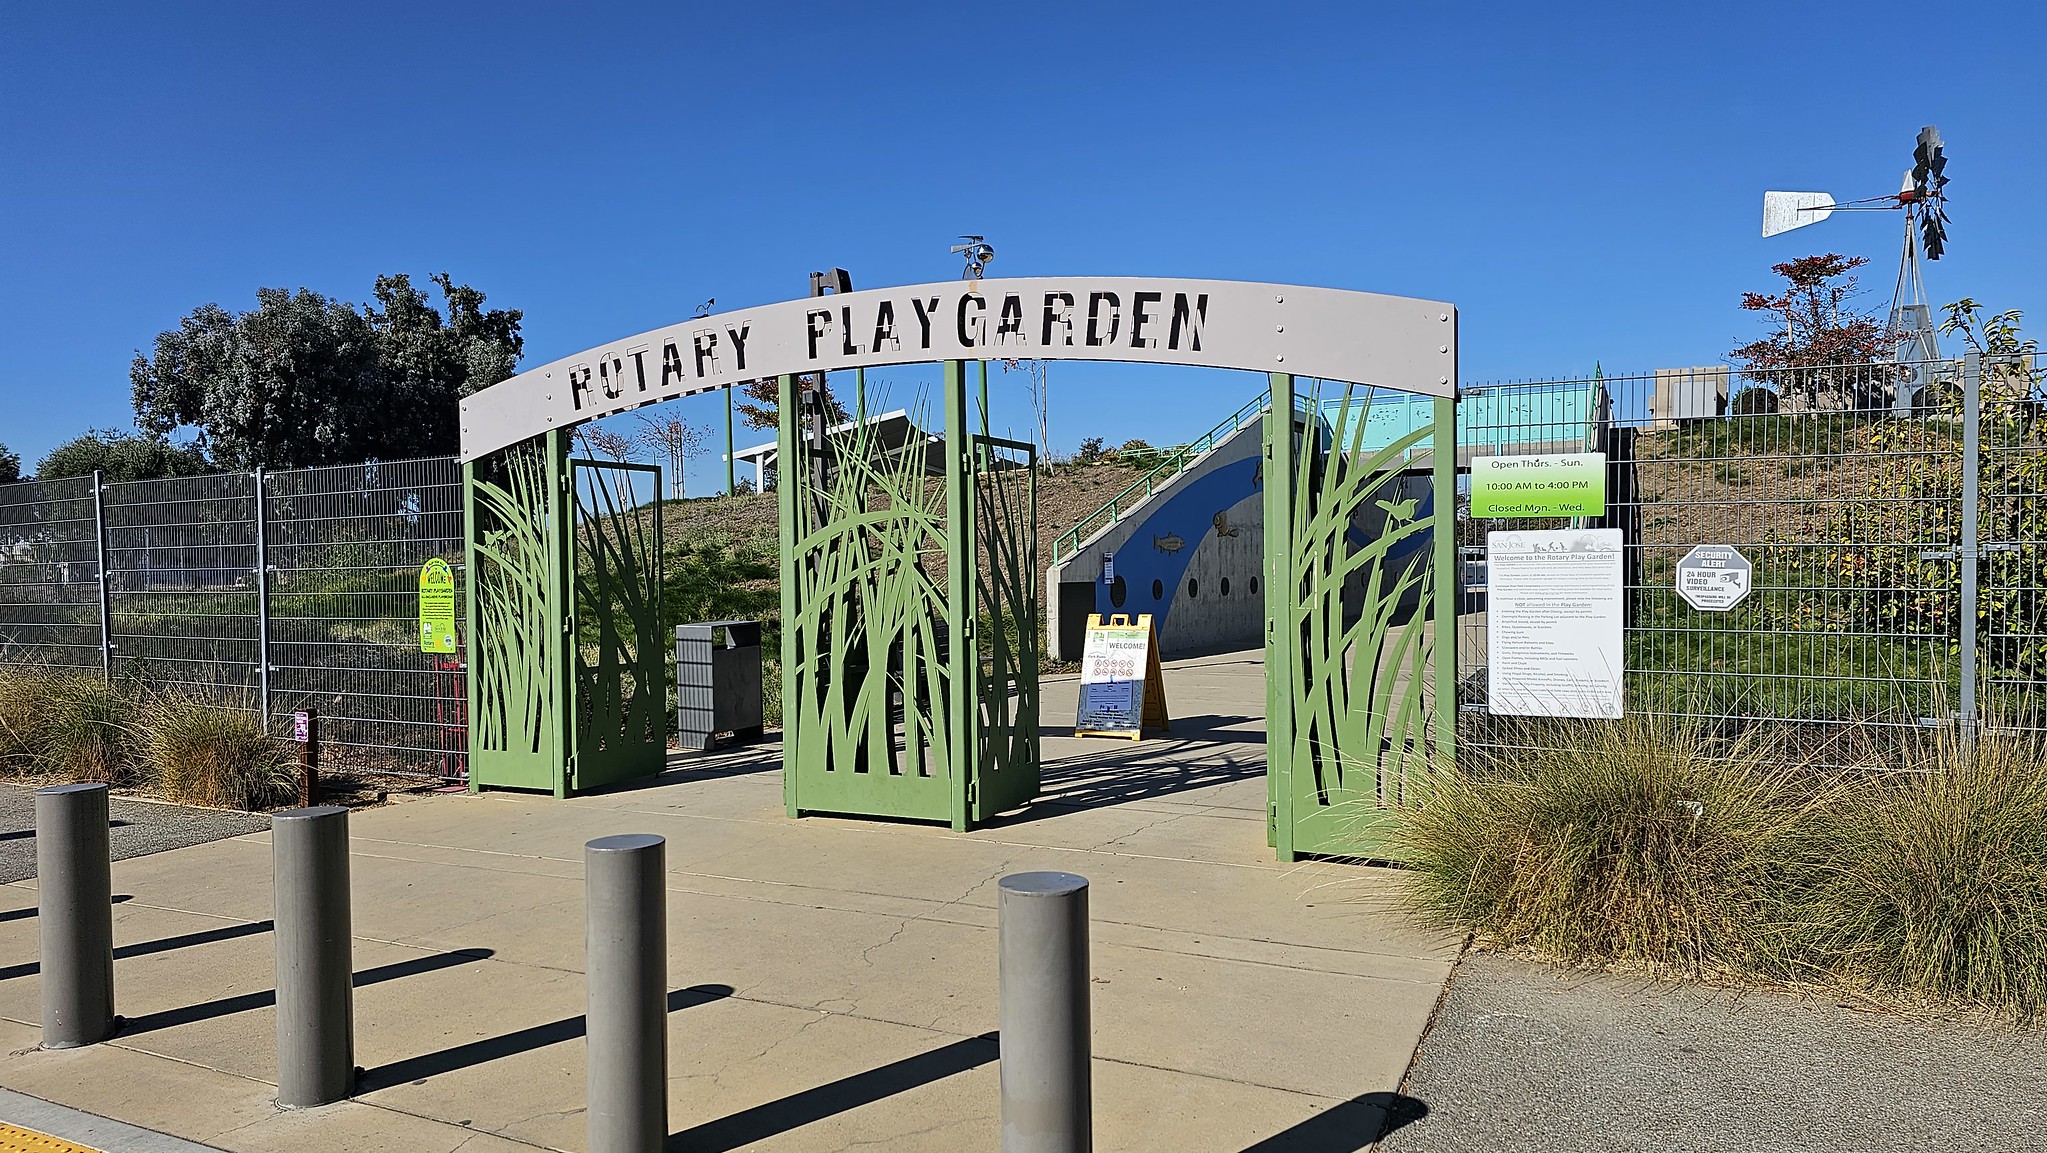 The Rotary PlayGarden in San Jose